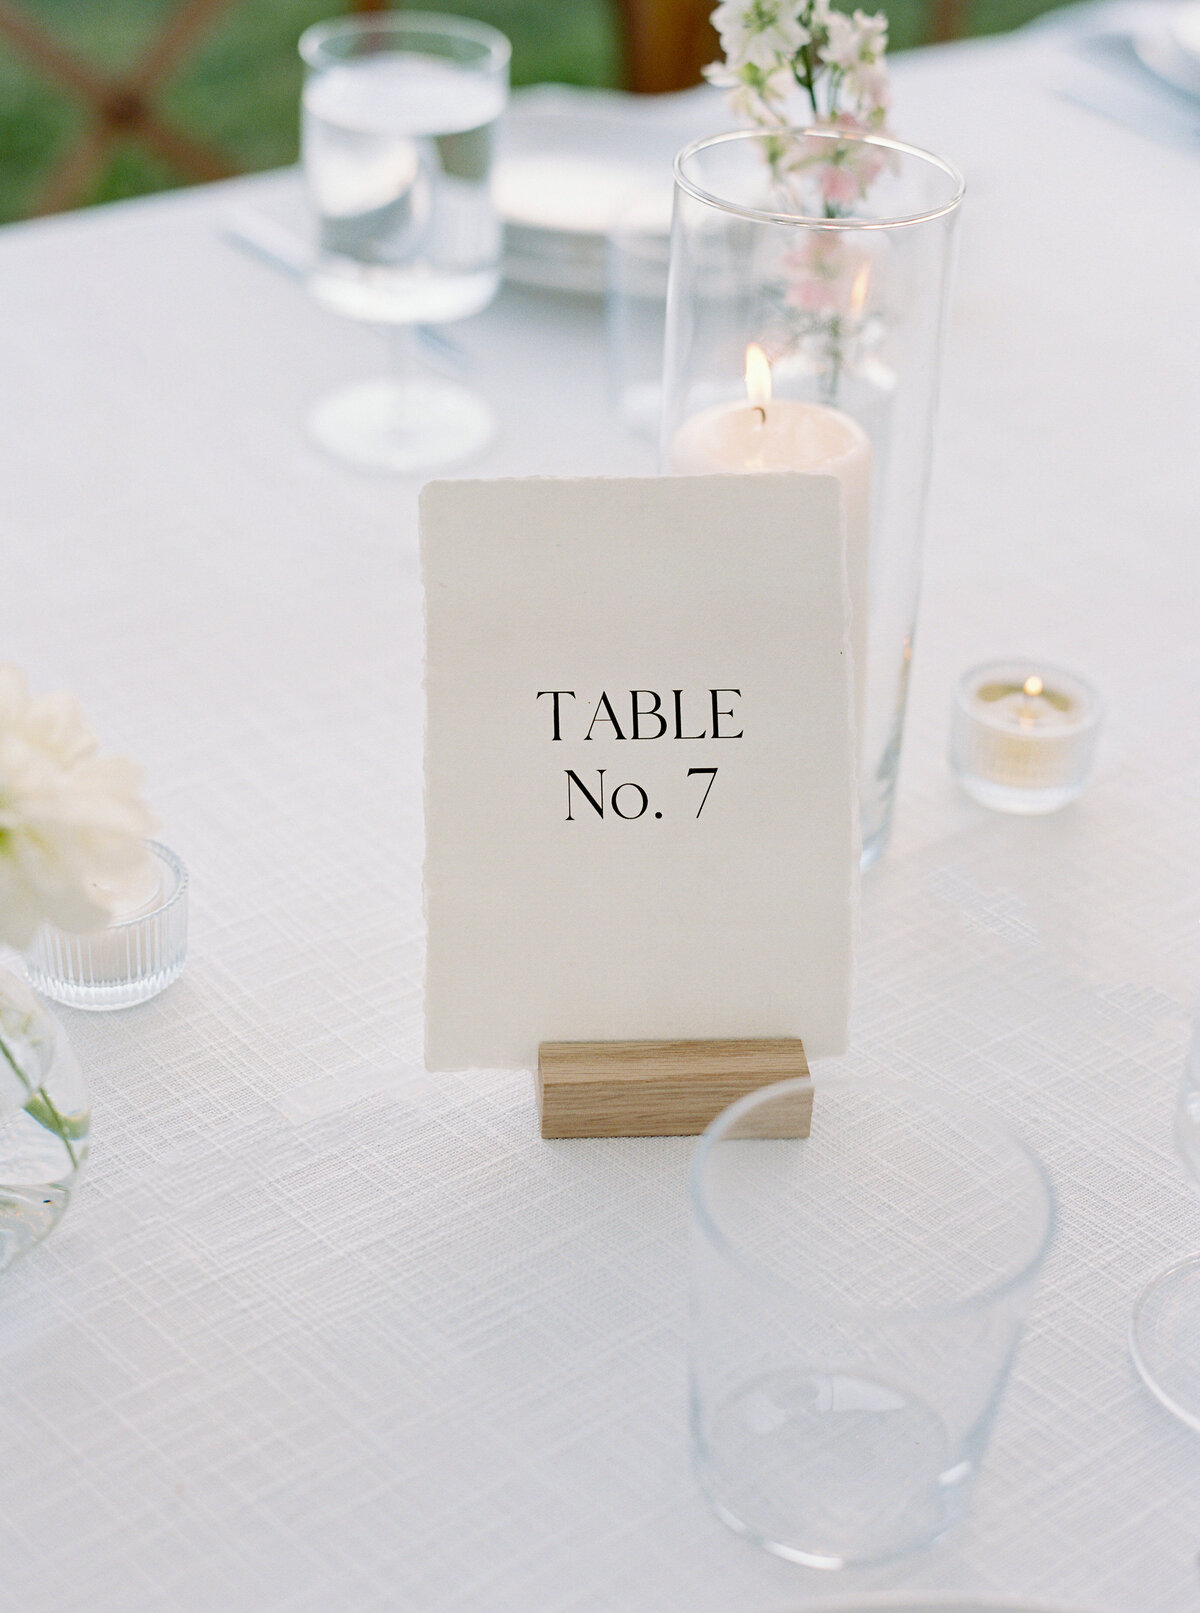 Bloomsbury-Farm-Ceremony-Sperry-Tent-Reception-Cross-back-chair-white-linen-table-number-modern